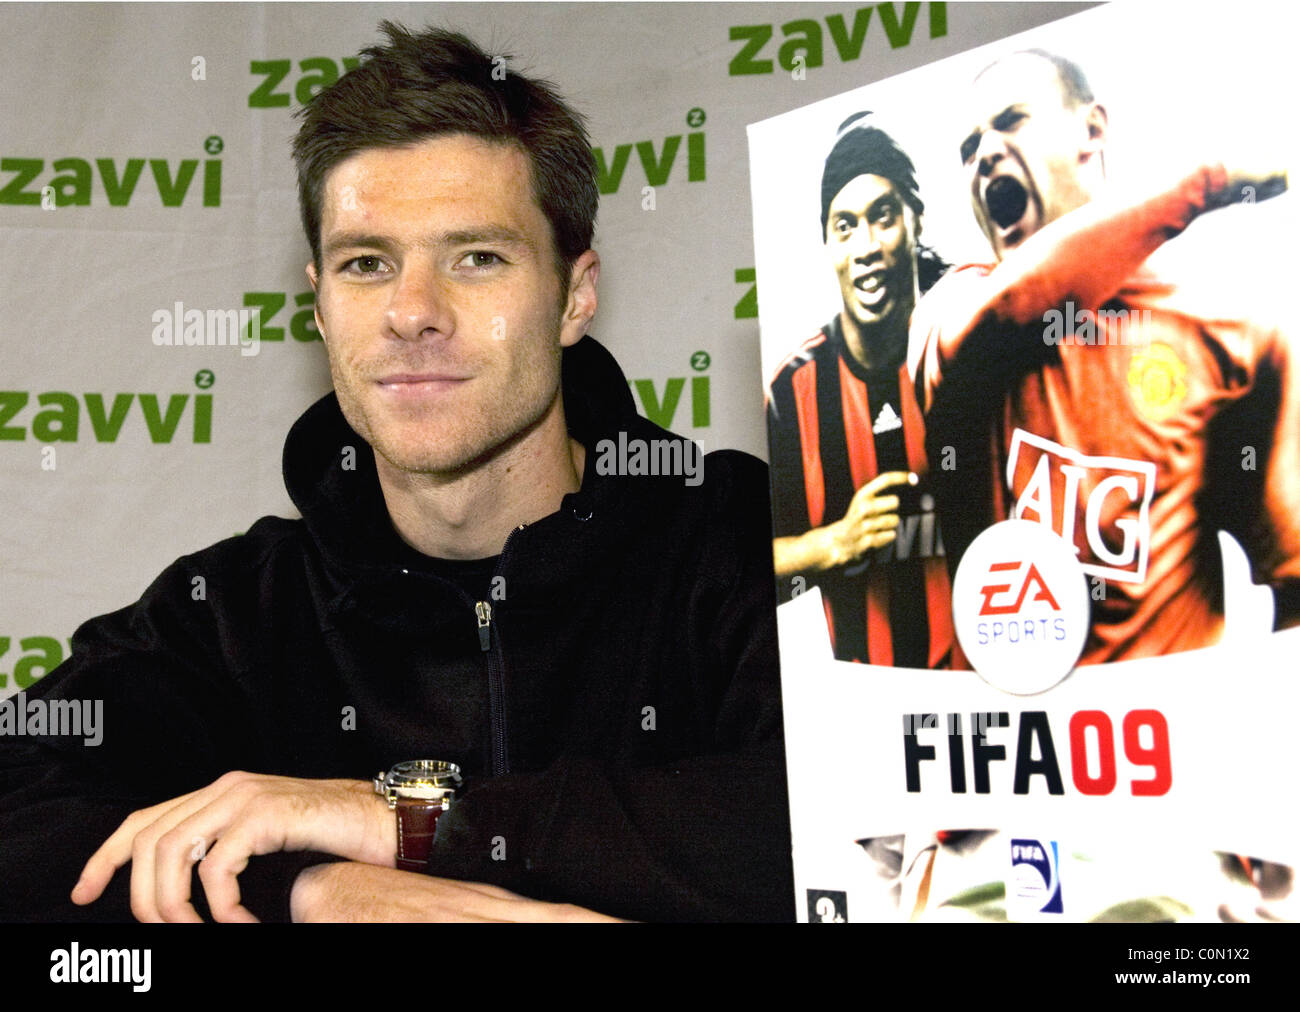 Xabi alonso liverpool hi-res stock photography and images - Alamy